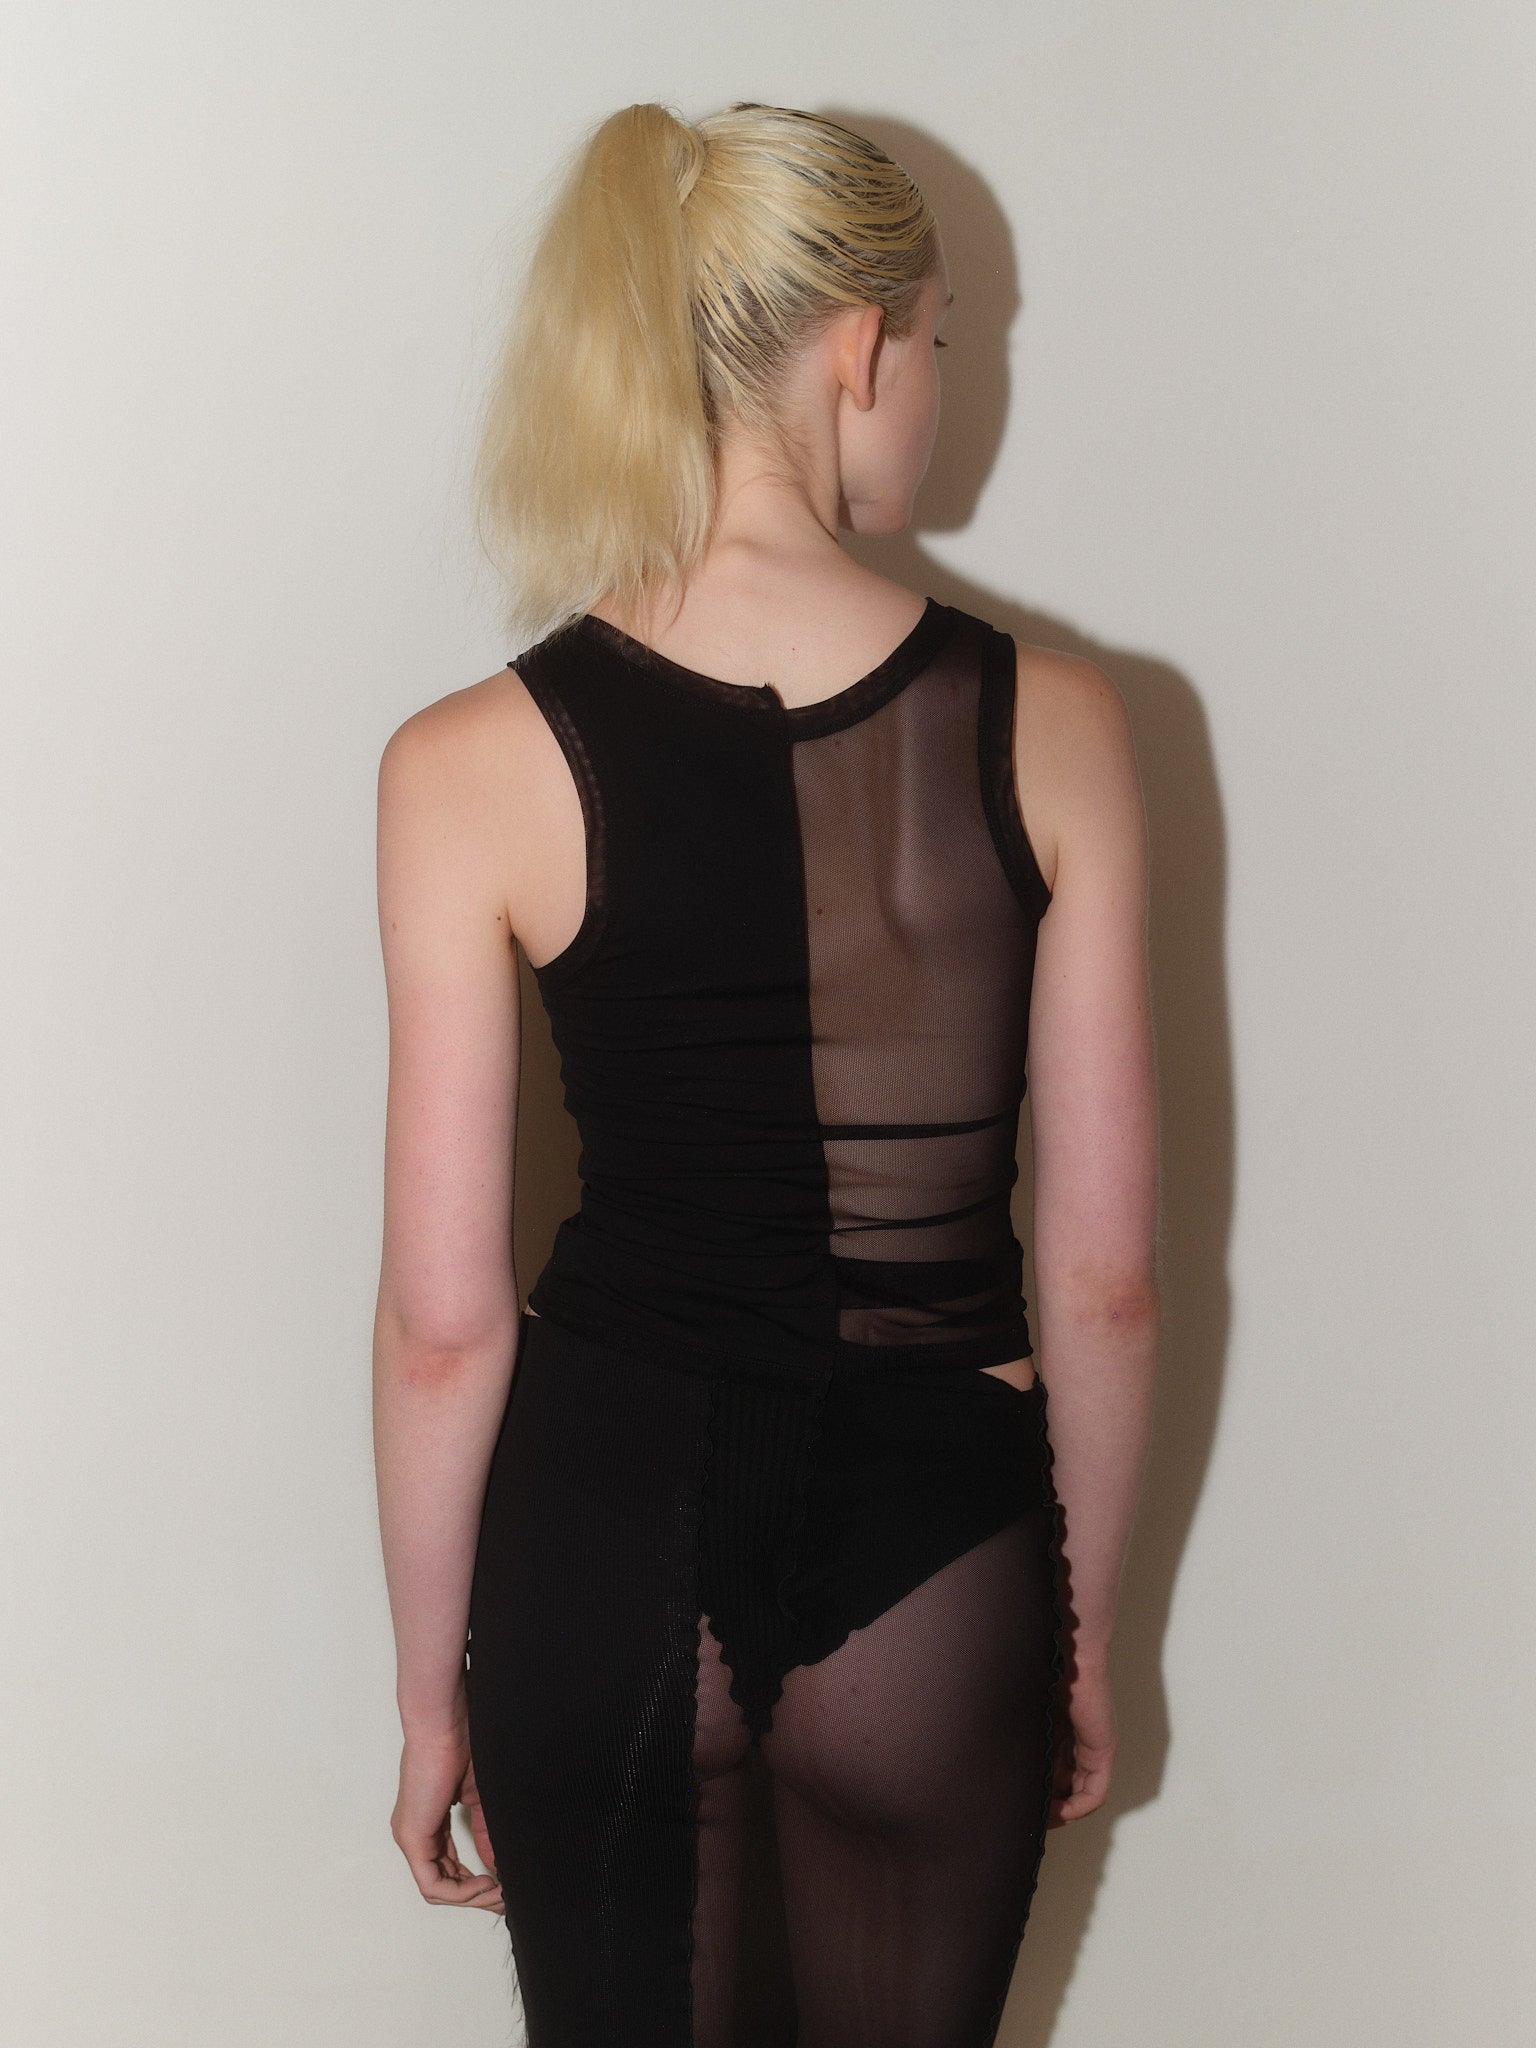 Split Sheer Tank Top designed by Christina Seewald. Sustainable, designed and made in Europe.